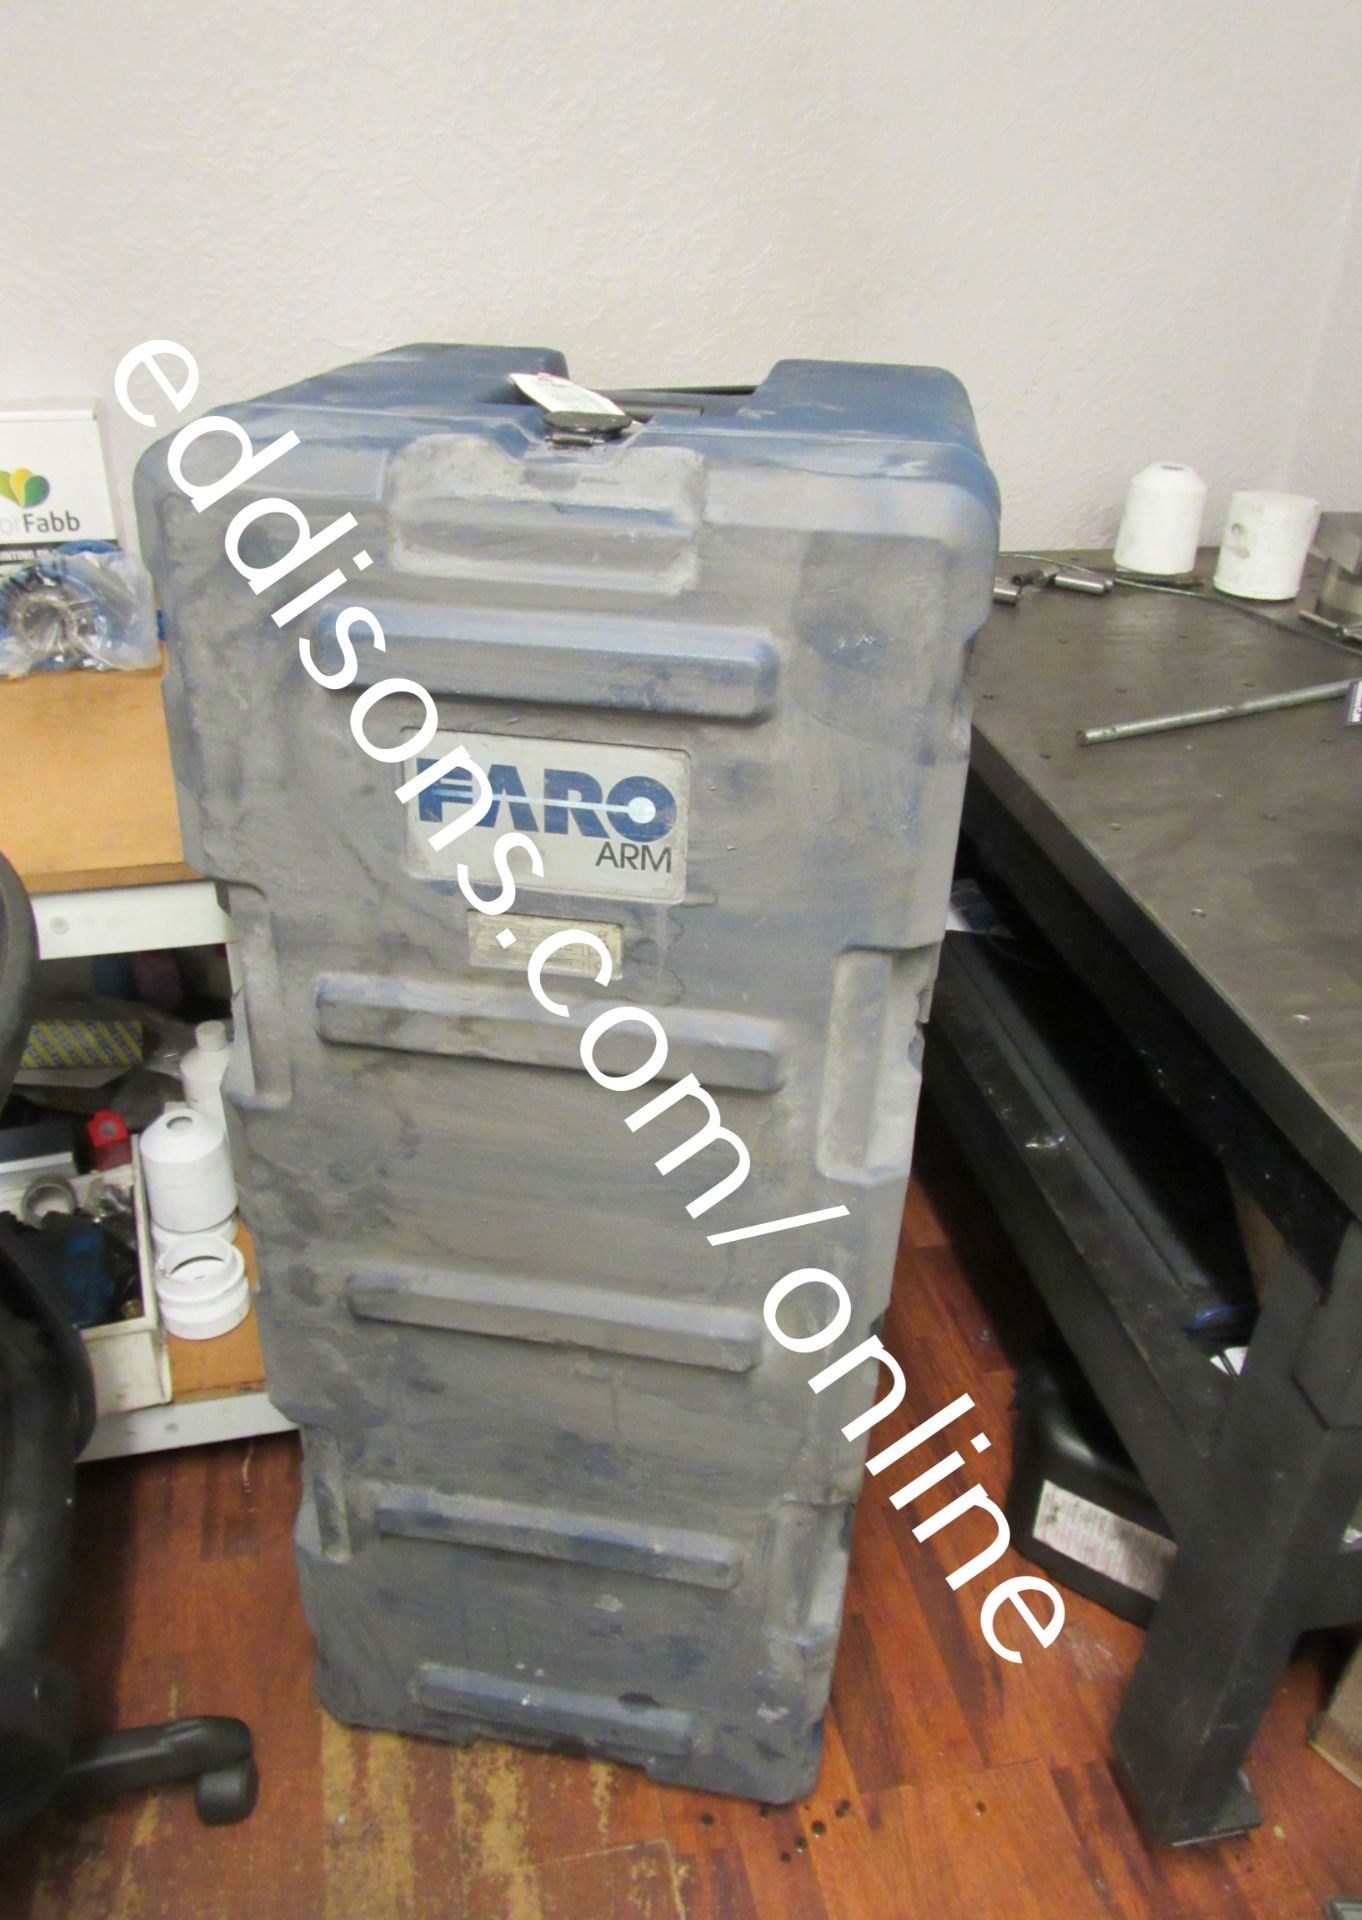 Faro Edge Arm portable coordinate measuring machine, Year 2013, Serial Number E-06-05-12-28102, with - Image 7 of 9